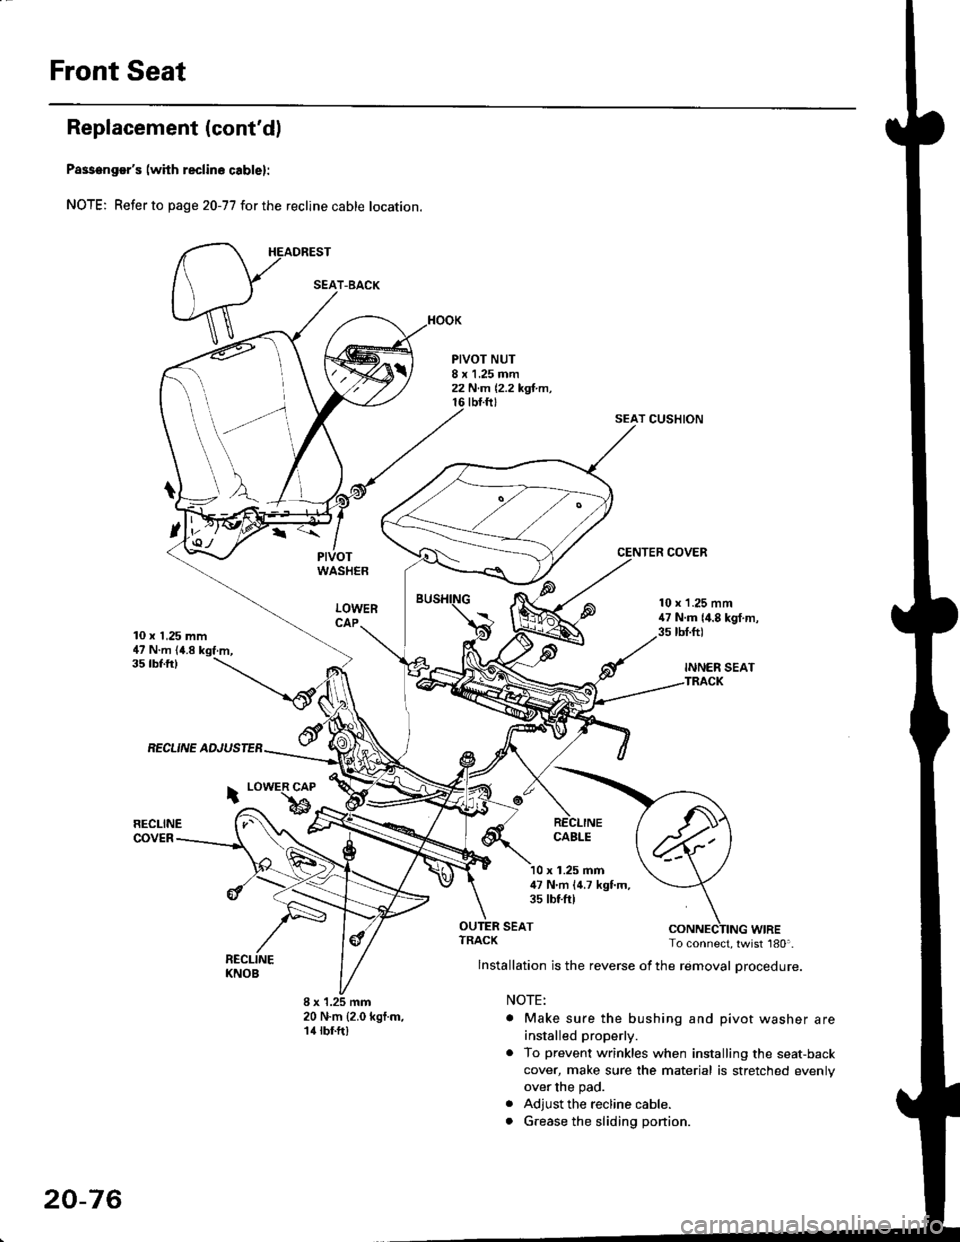 HONDA CIVIC 1996 6.G Workshop Manual Front Seat
Replacement (contd)
Passengers (with reclino cablel:
NOTE; Refer to page 20-77 for the recline cable location.
HEADREST
PIVOTWASHER
LOWERCAP
PIVOT NUT8 x 1.25 mm22 N.m 12,2 kgl.m,tbt.ftt
